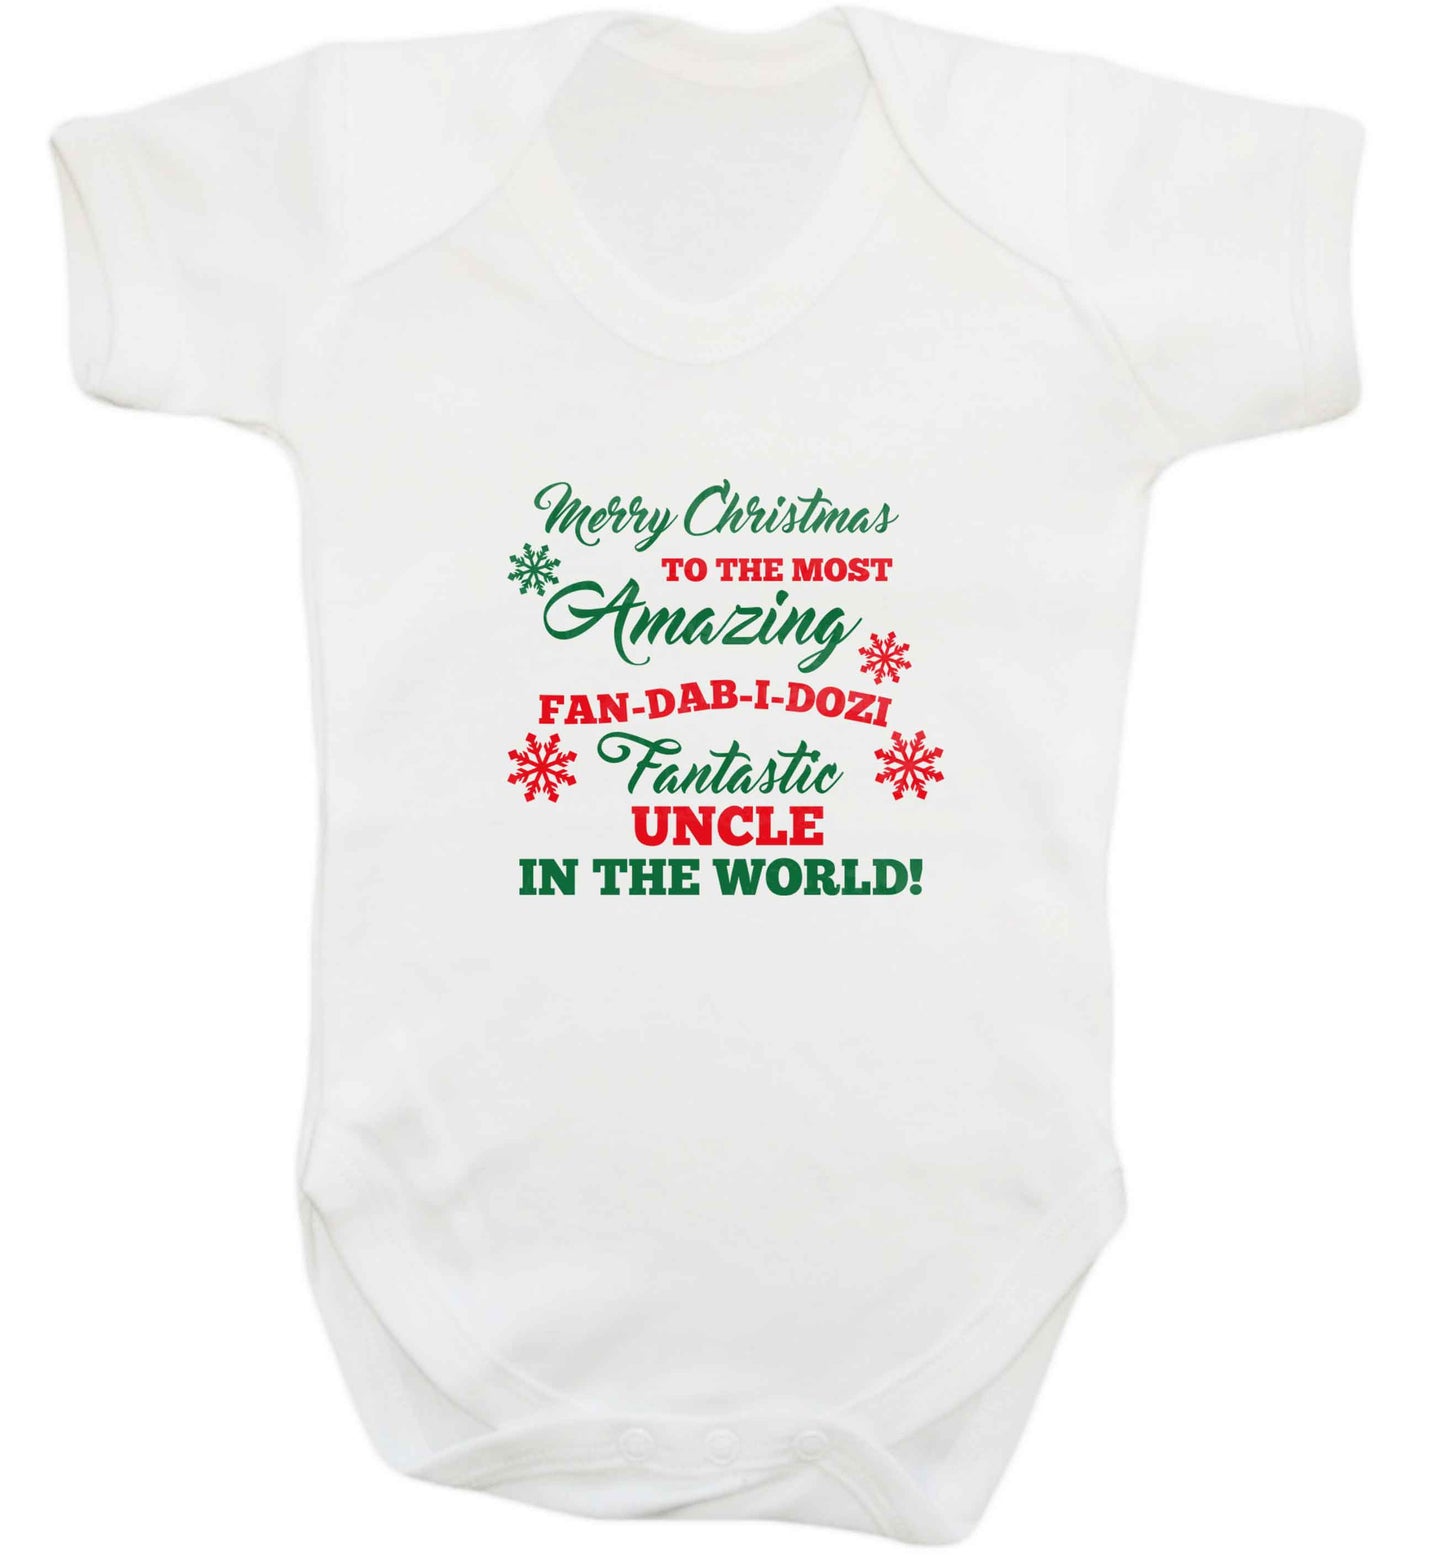 Merry Christmas to the most amazing fan-dab-i-dozi fantasic Uncle in the world baby vest white 18-24 months